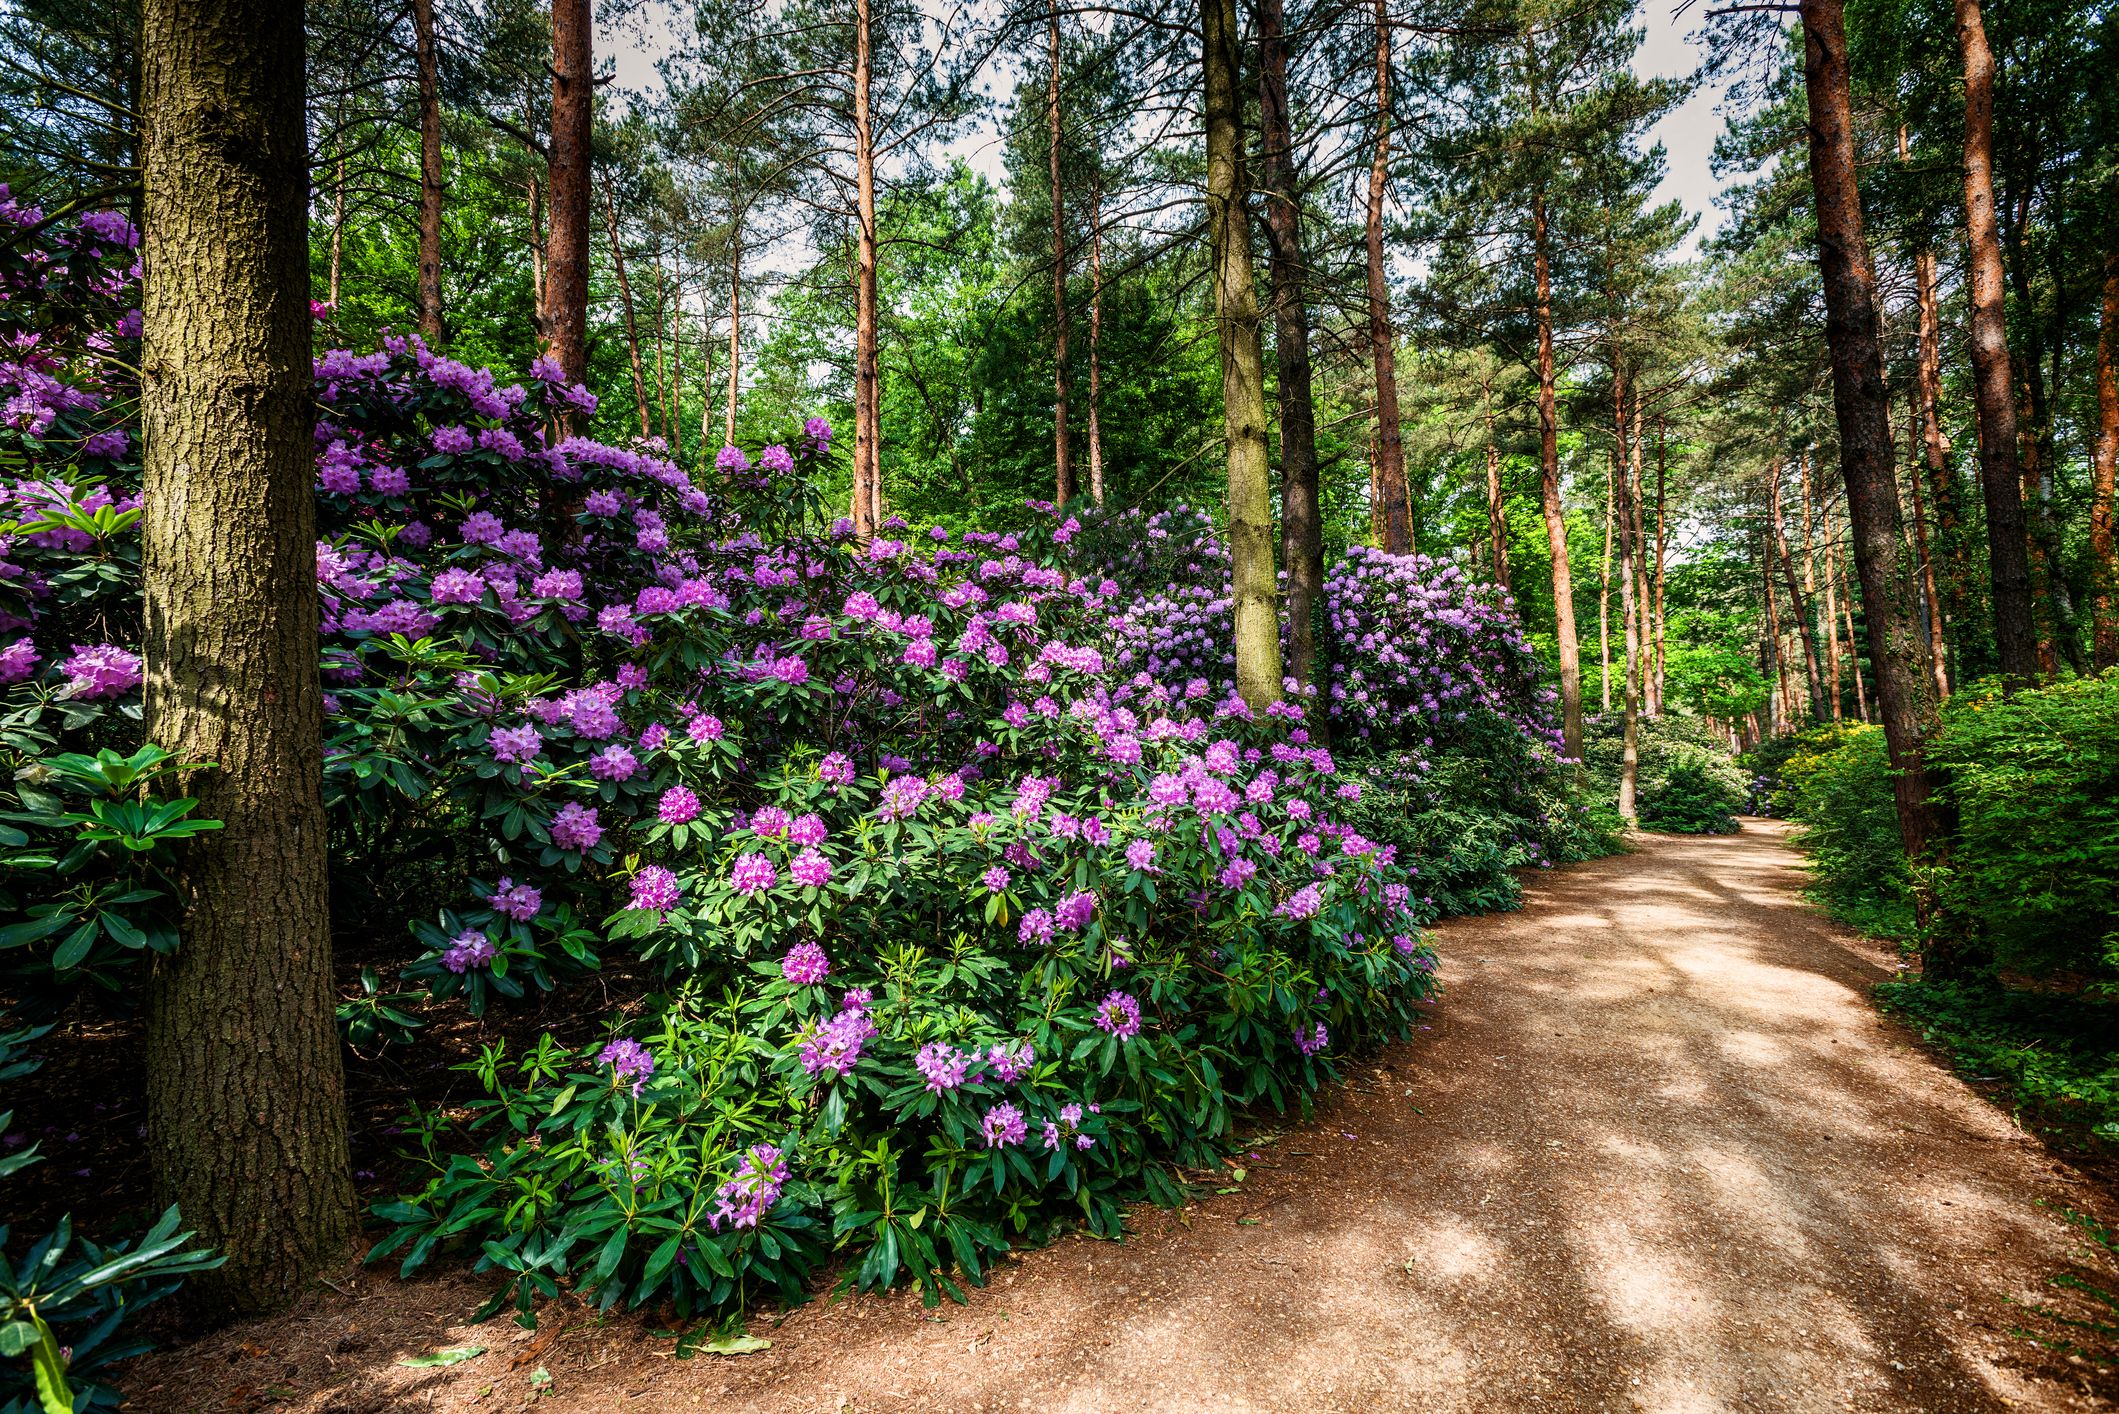 https://hips.hearstapps.com/hmg-prod/images/blooming-rhododendron-garden-royalty-free-image-1579739050.jpg